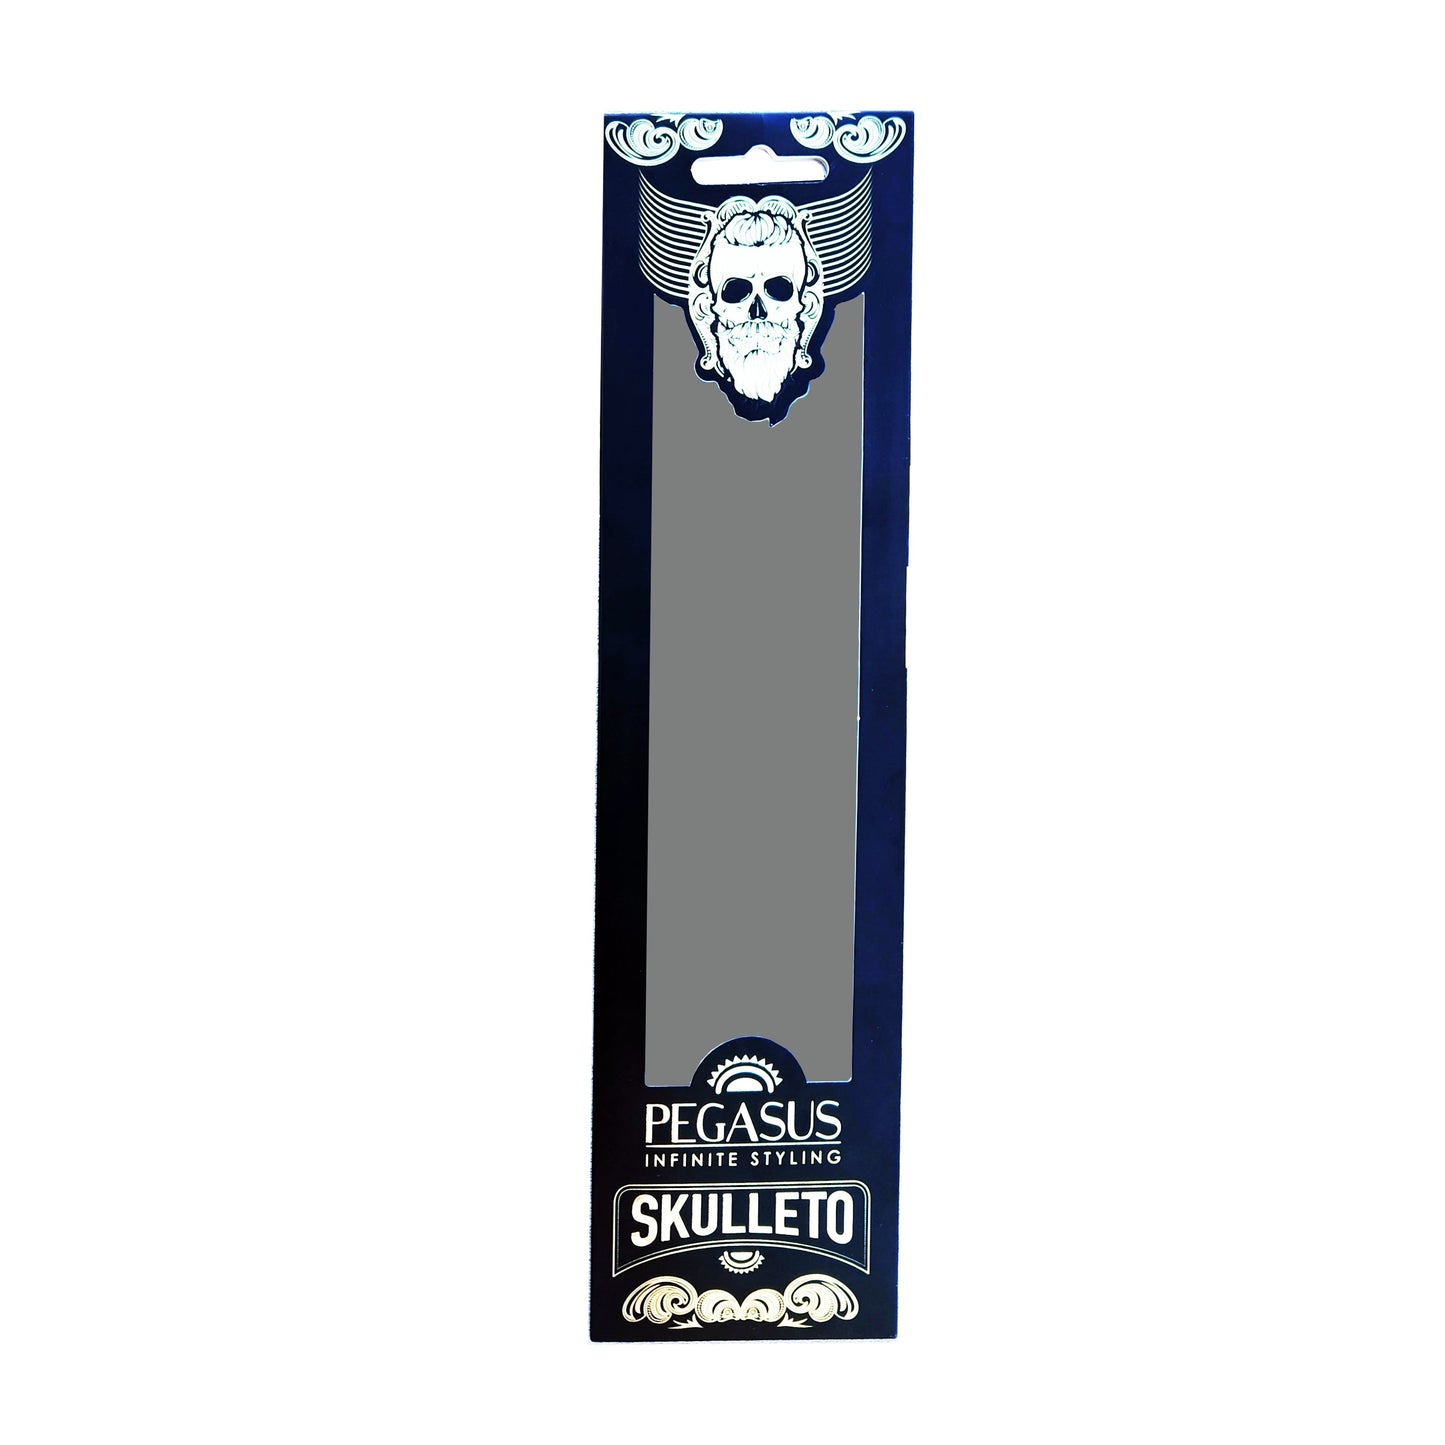 Pegasus Skulleto 302, 7in Hard Rubber Barber Comb with Extra Fine Teeth, Seamless, Smooth Edges, Anti Static, Heat and Chemically Resistant, Wet Hair, Everyday Grooming Comb | Peines de goma dura - Silver